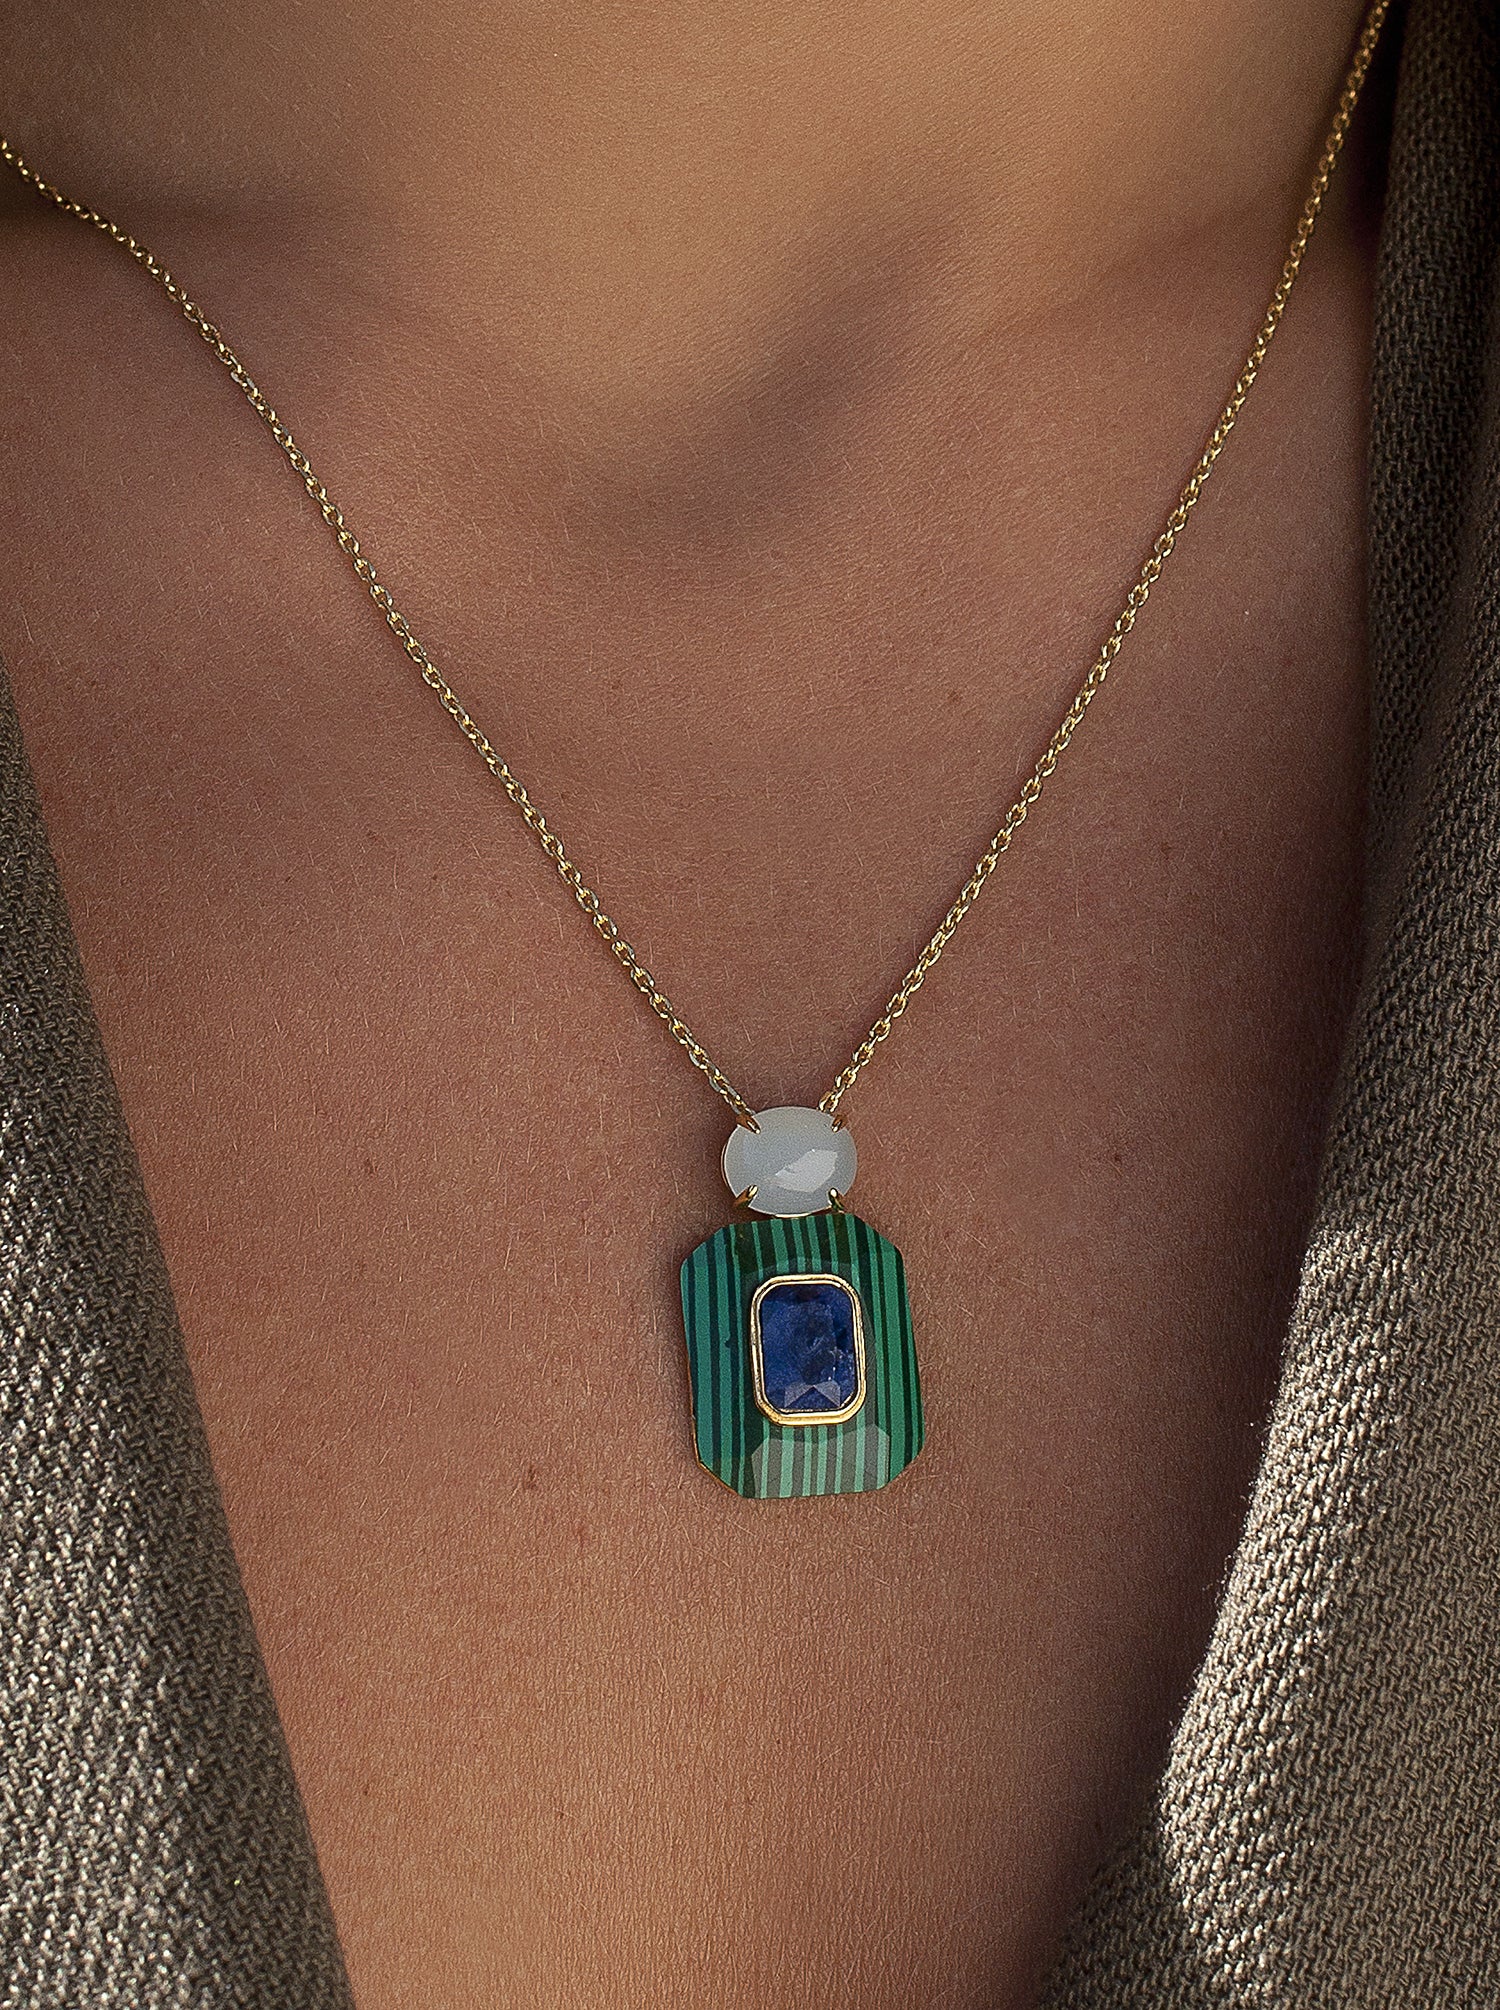 Necklaces with pendants in green tones and central motif with navy blue stones